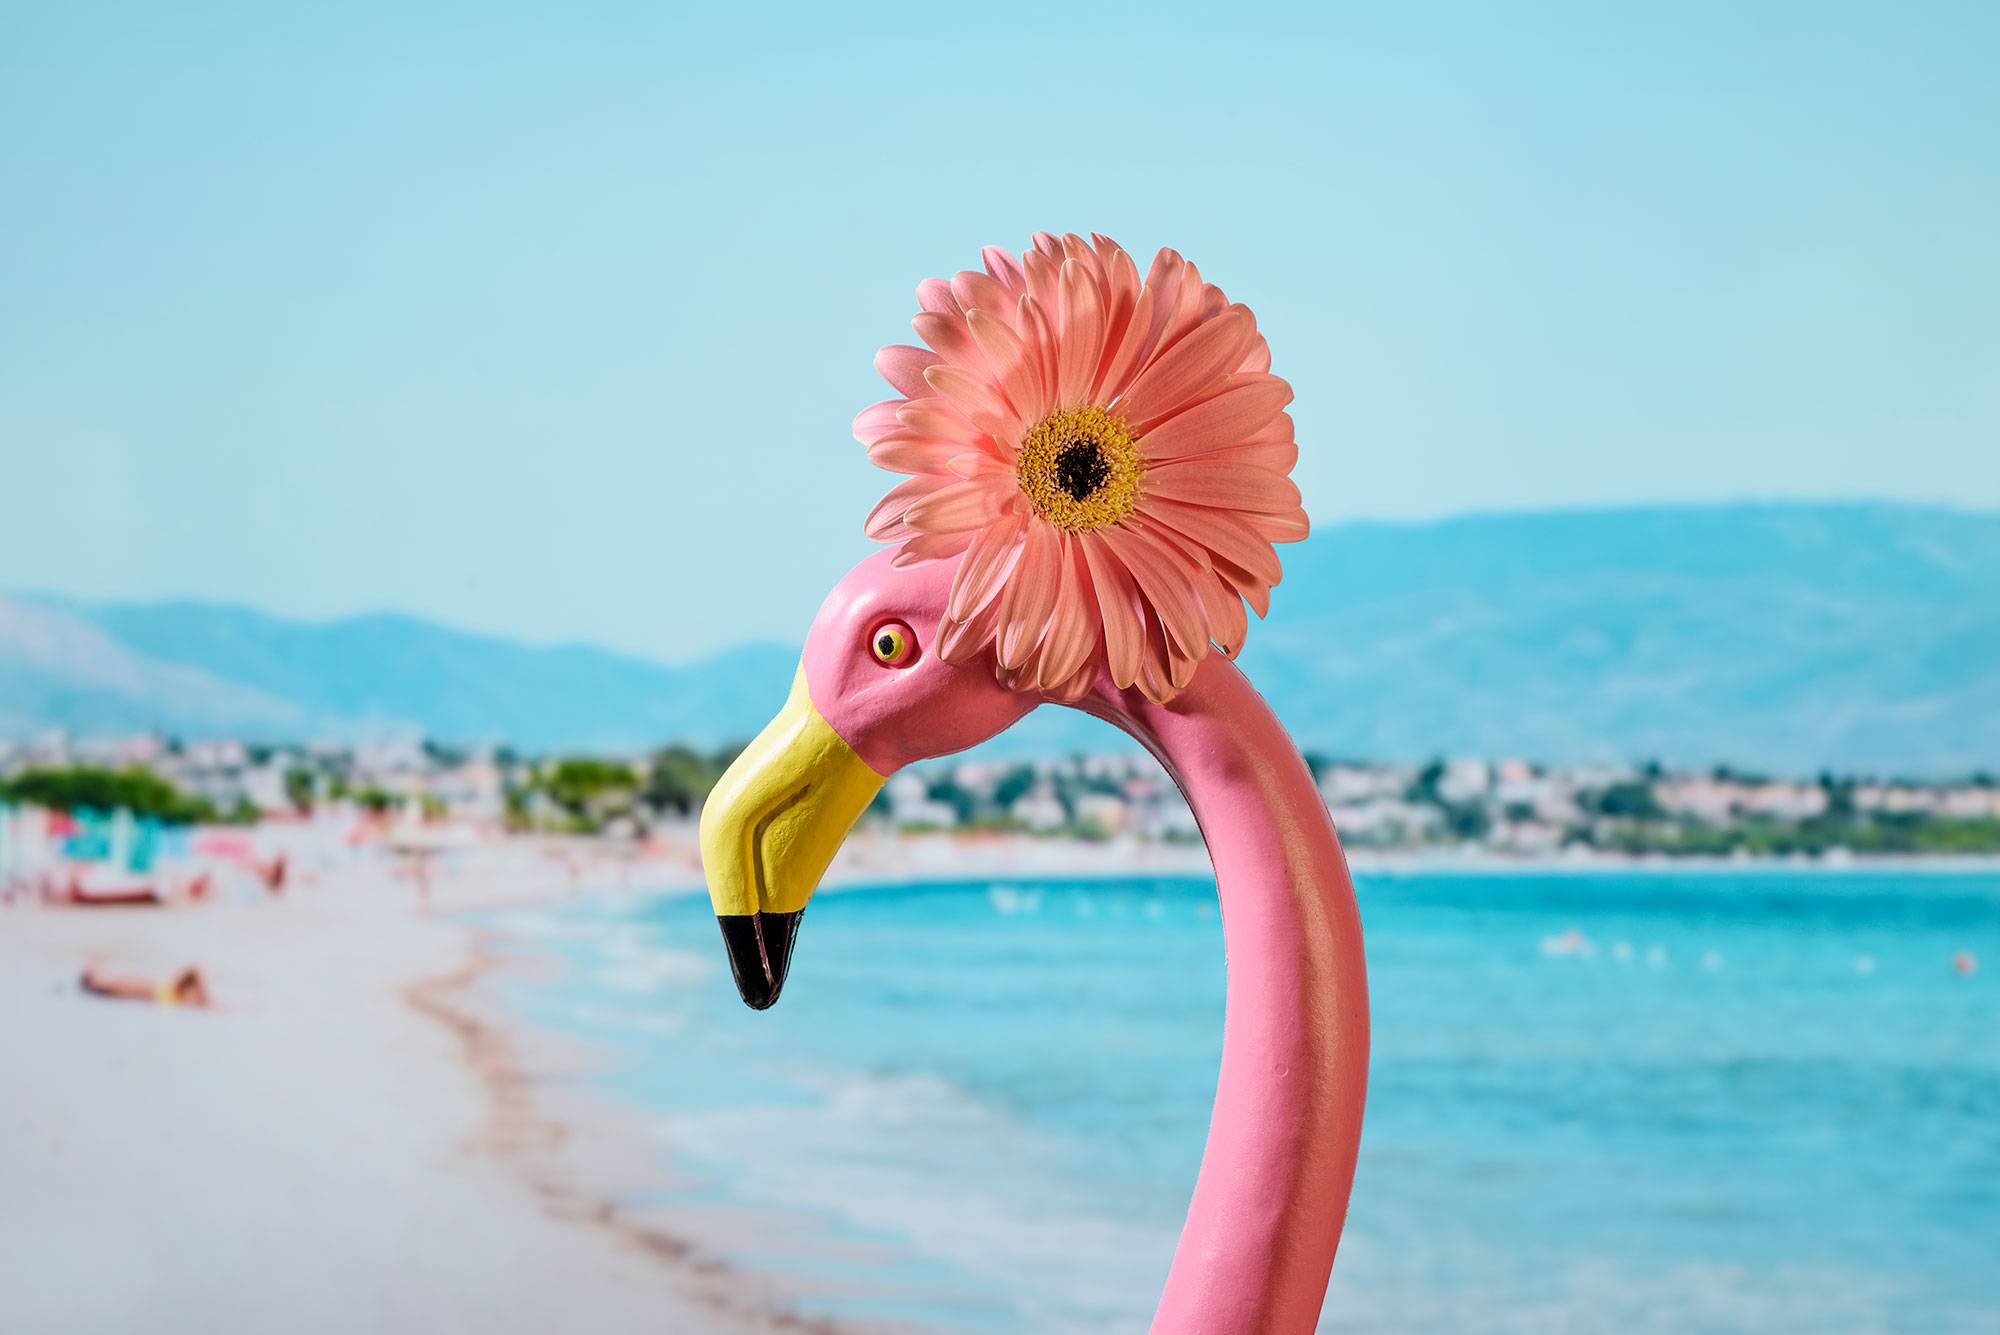 a plastic pink flamingo, wearing a pink gerbera daisy in its head, in front of a beach on a TV screen